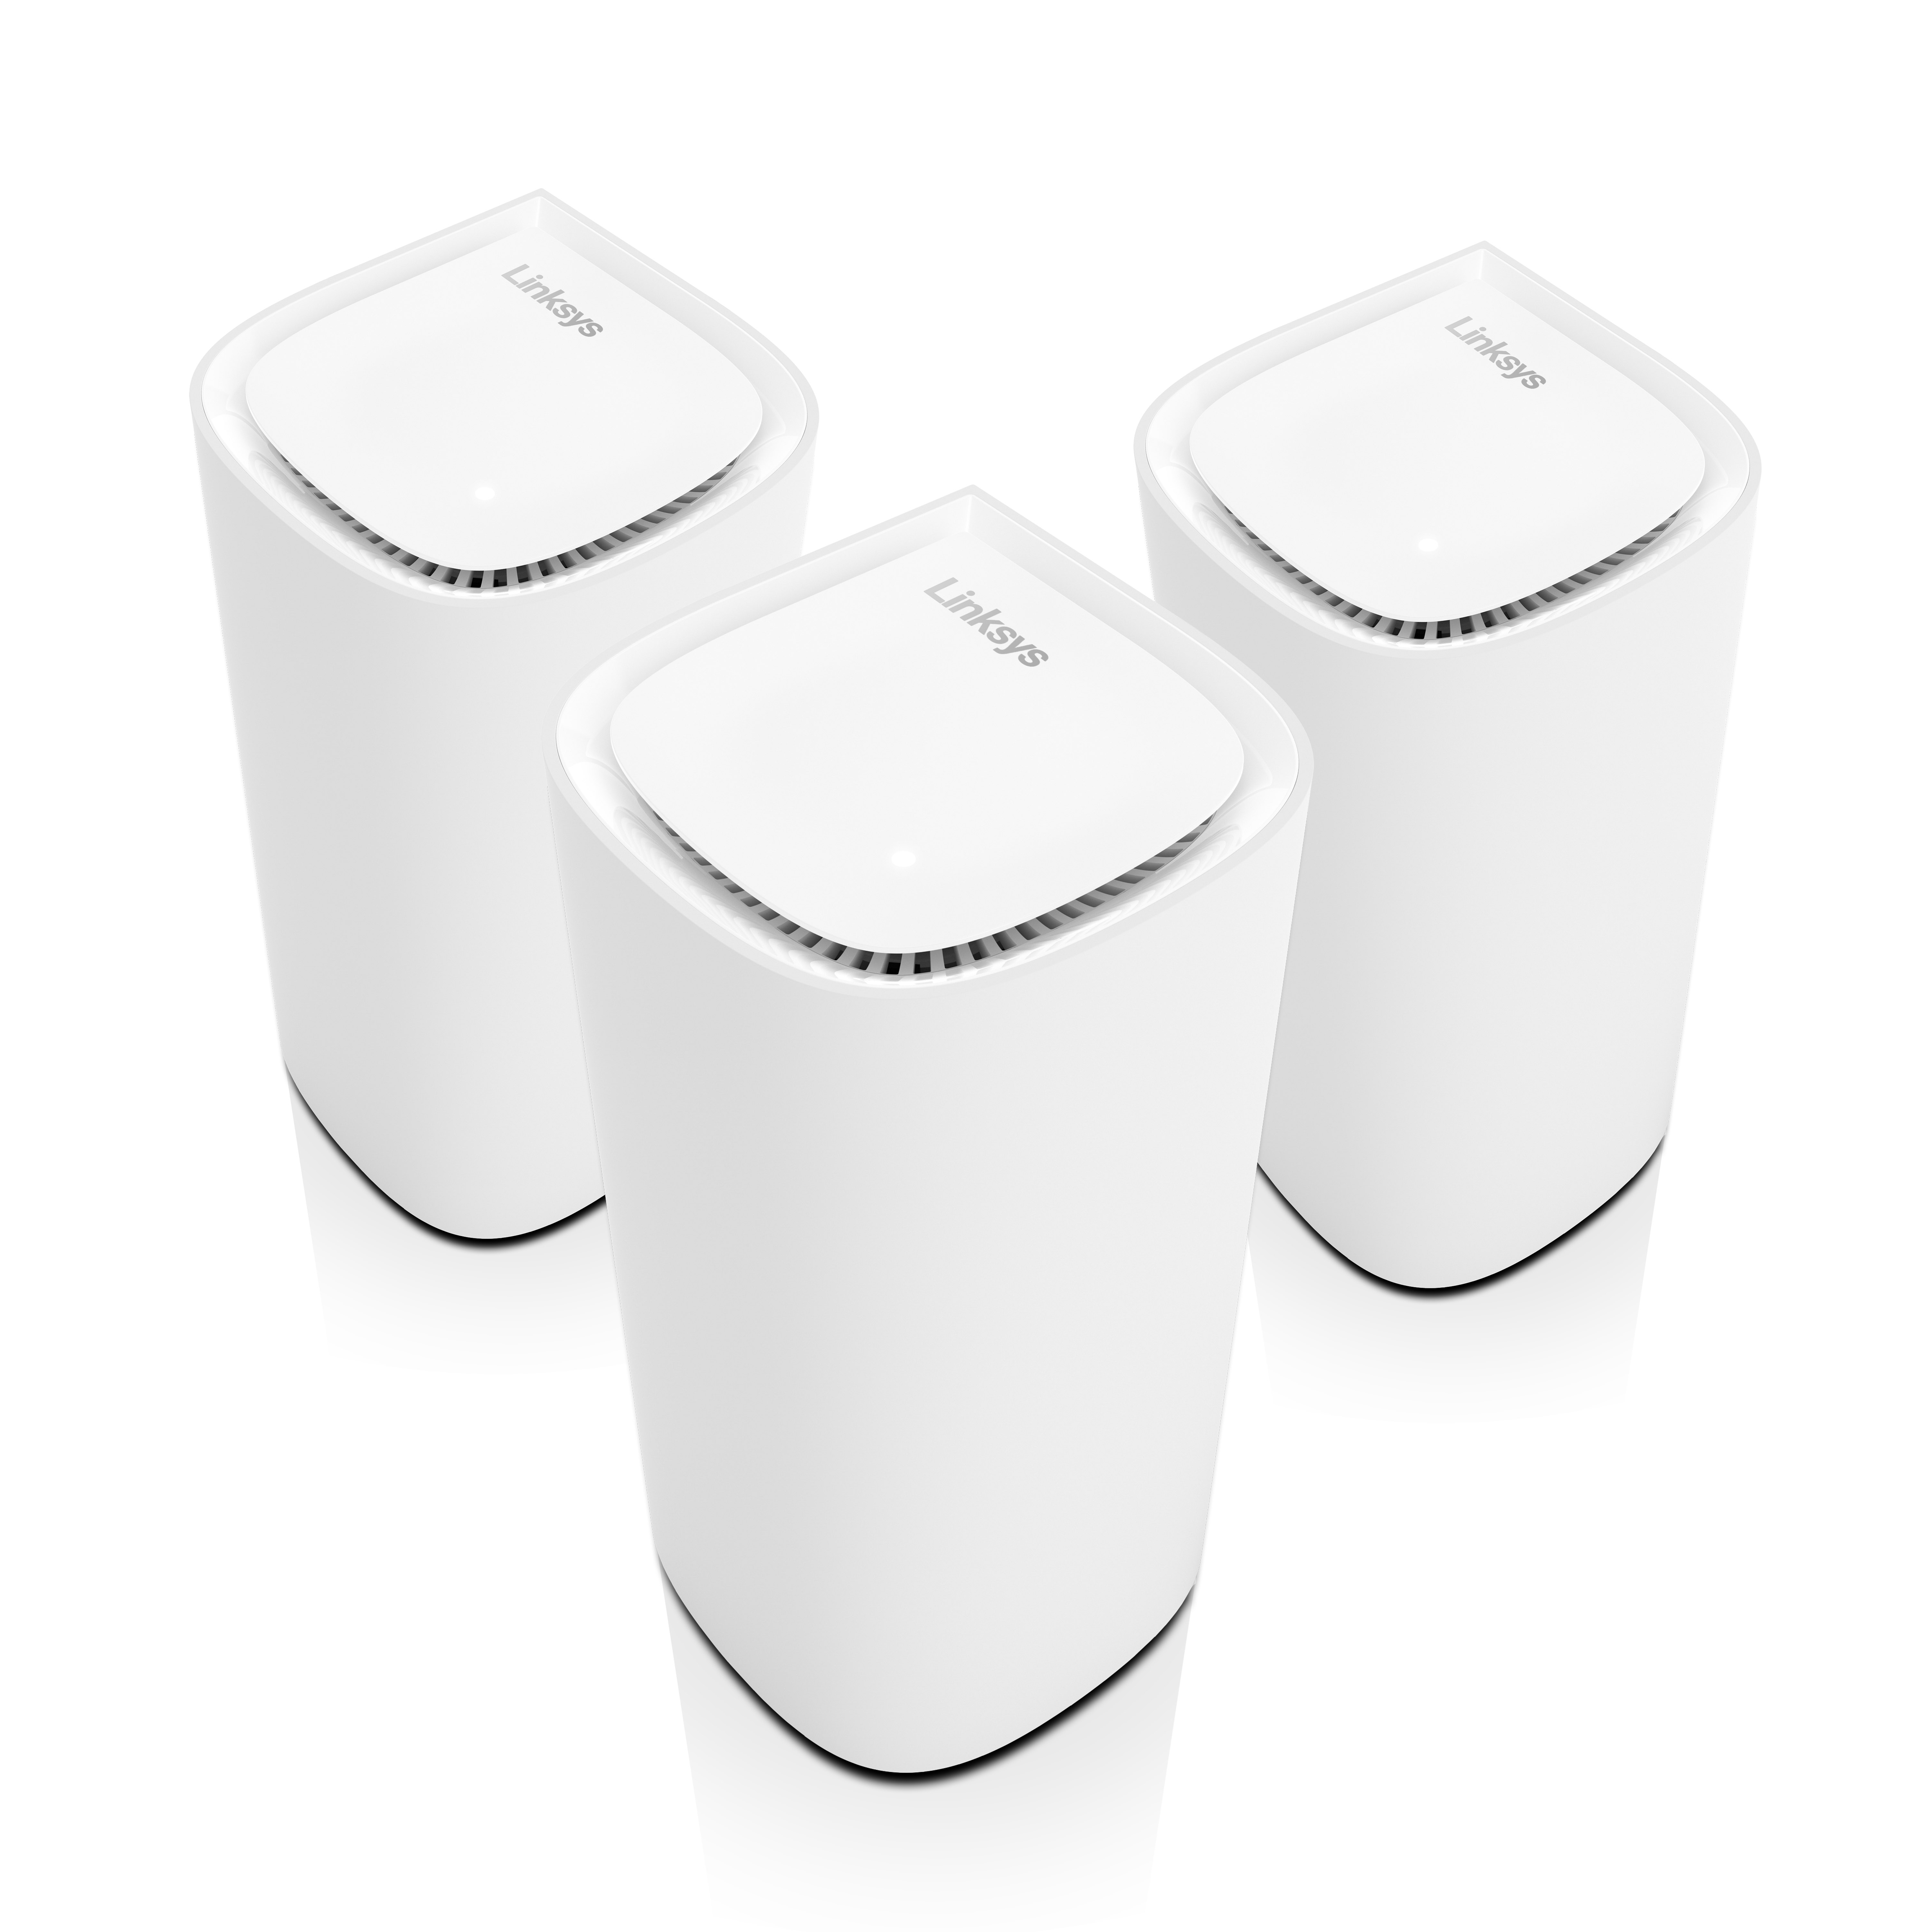 Mesh WiFi for Business